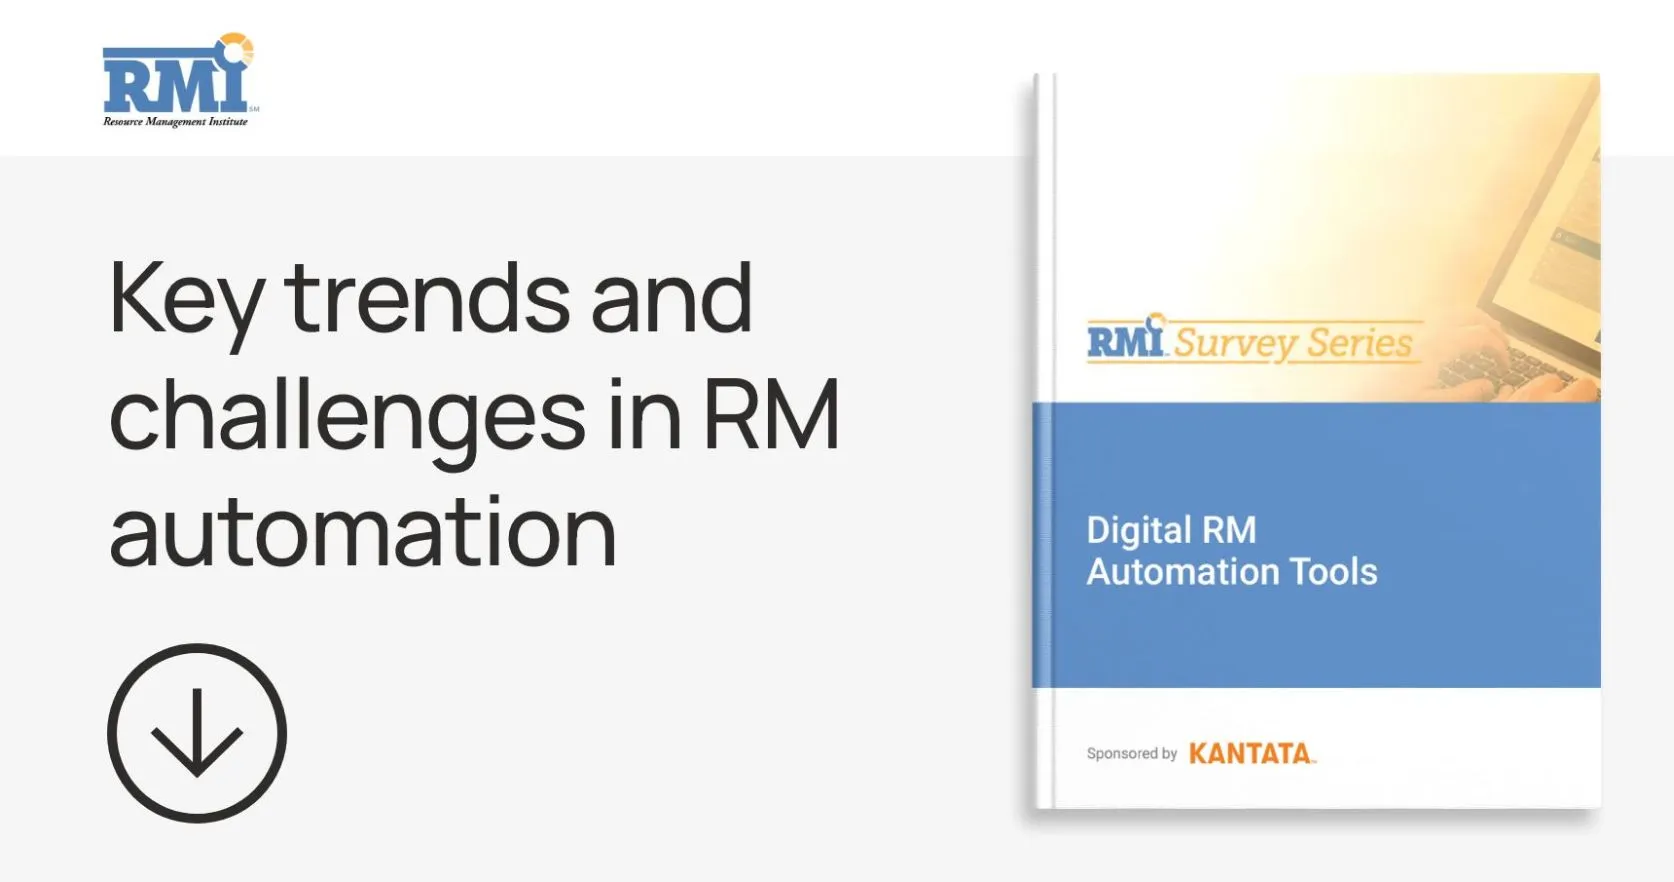 Resource Management Institute Research: Digital RM Automation Tools